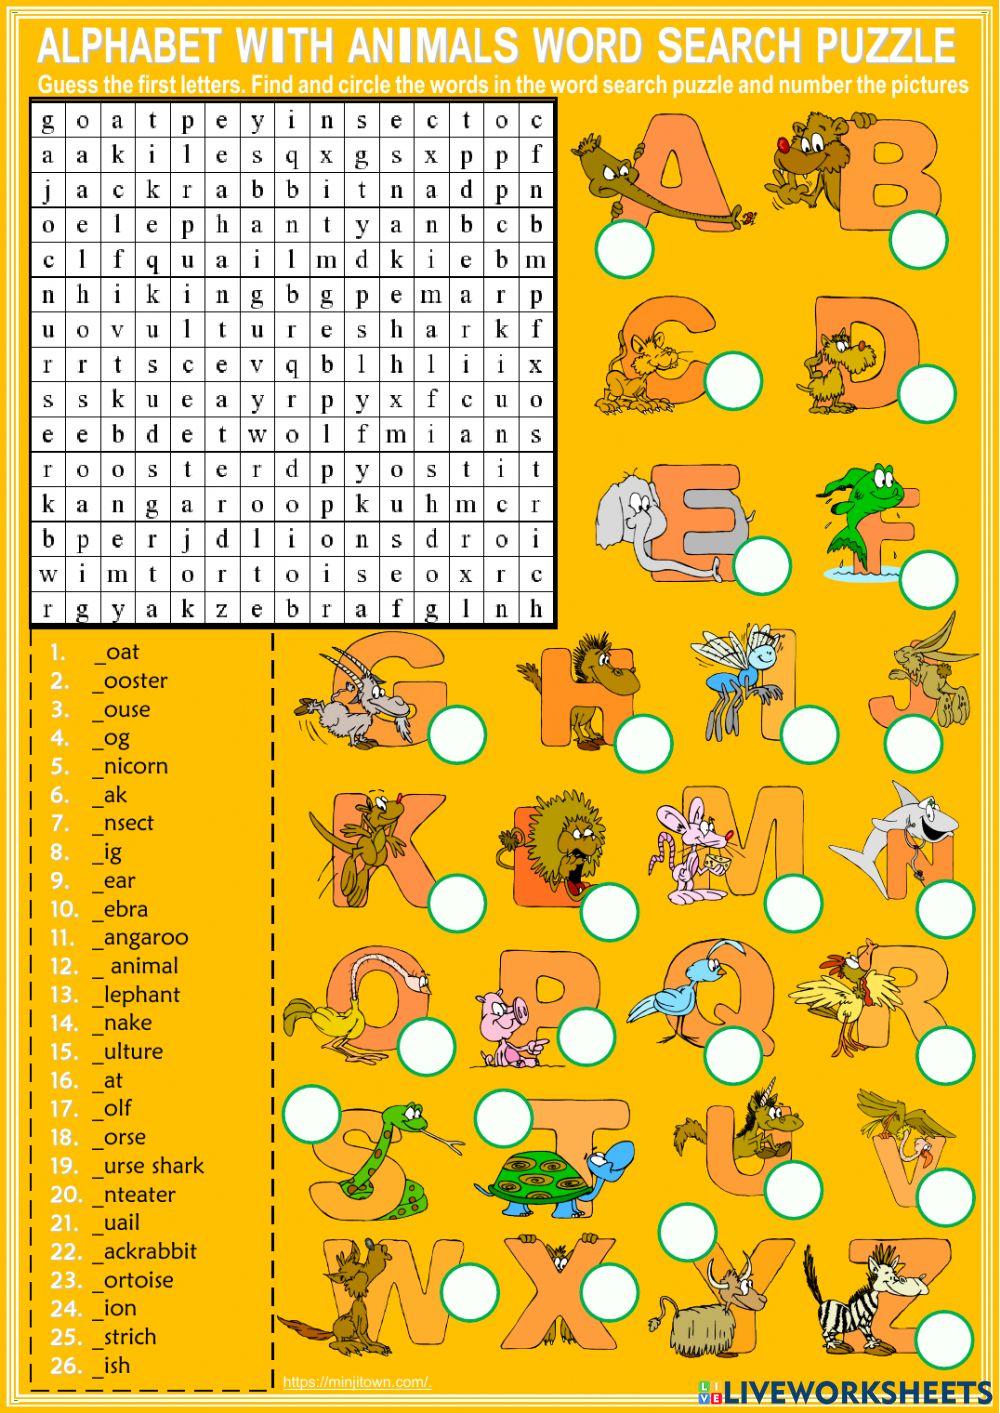 The English Alphabet interactive activity | Live Worksheets